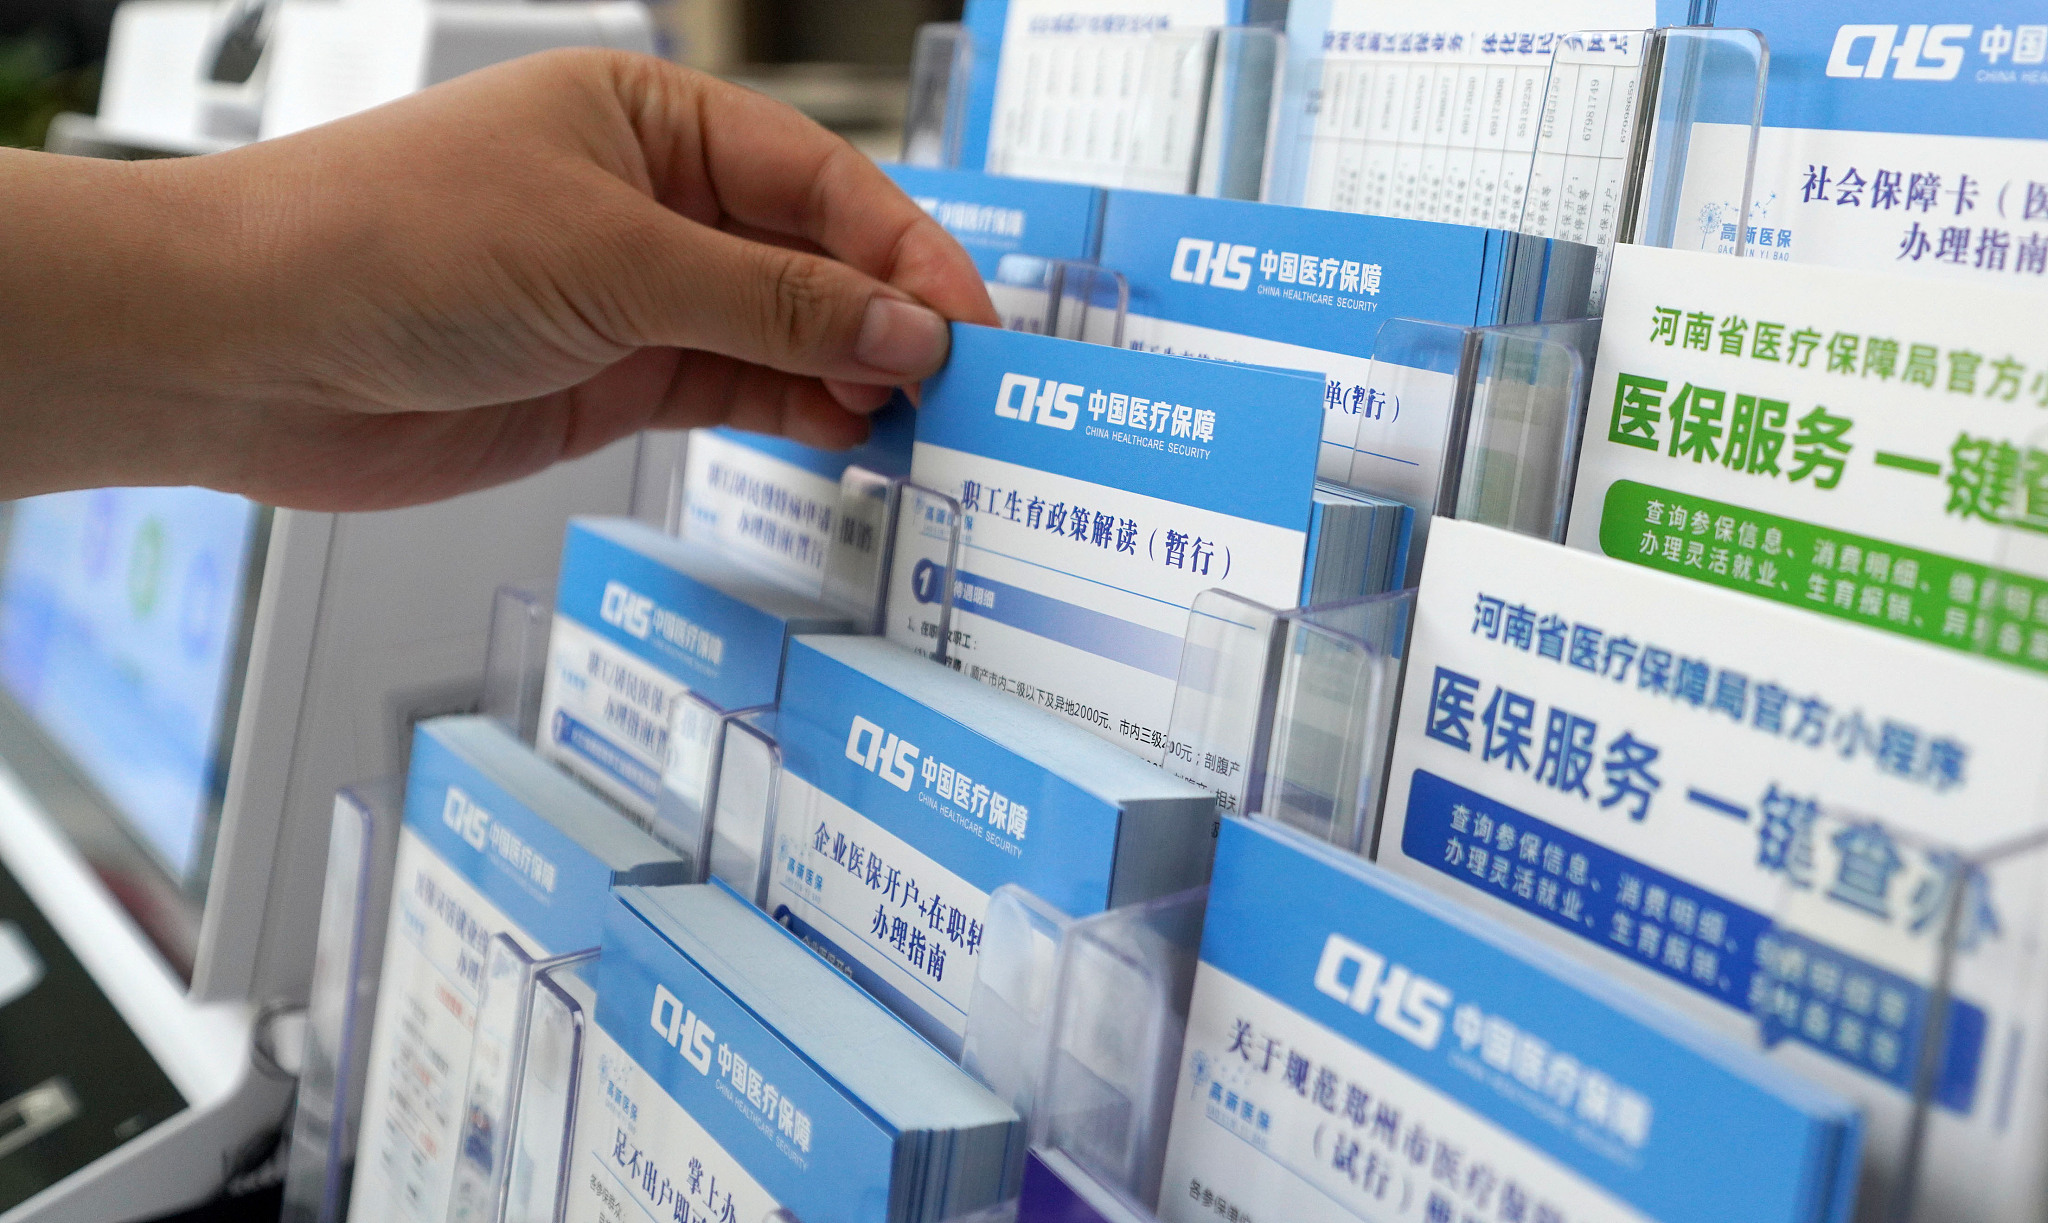 A medical insurance service promotion card in front of the service window, Zhengzhou, China, June 27, 2023. /Xinhua